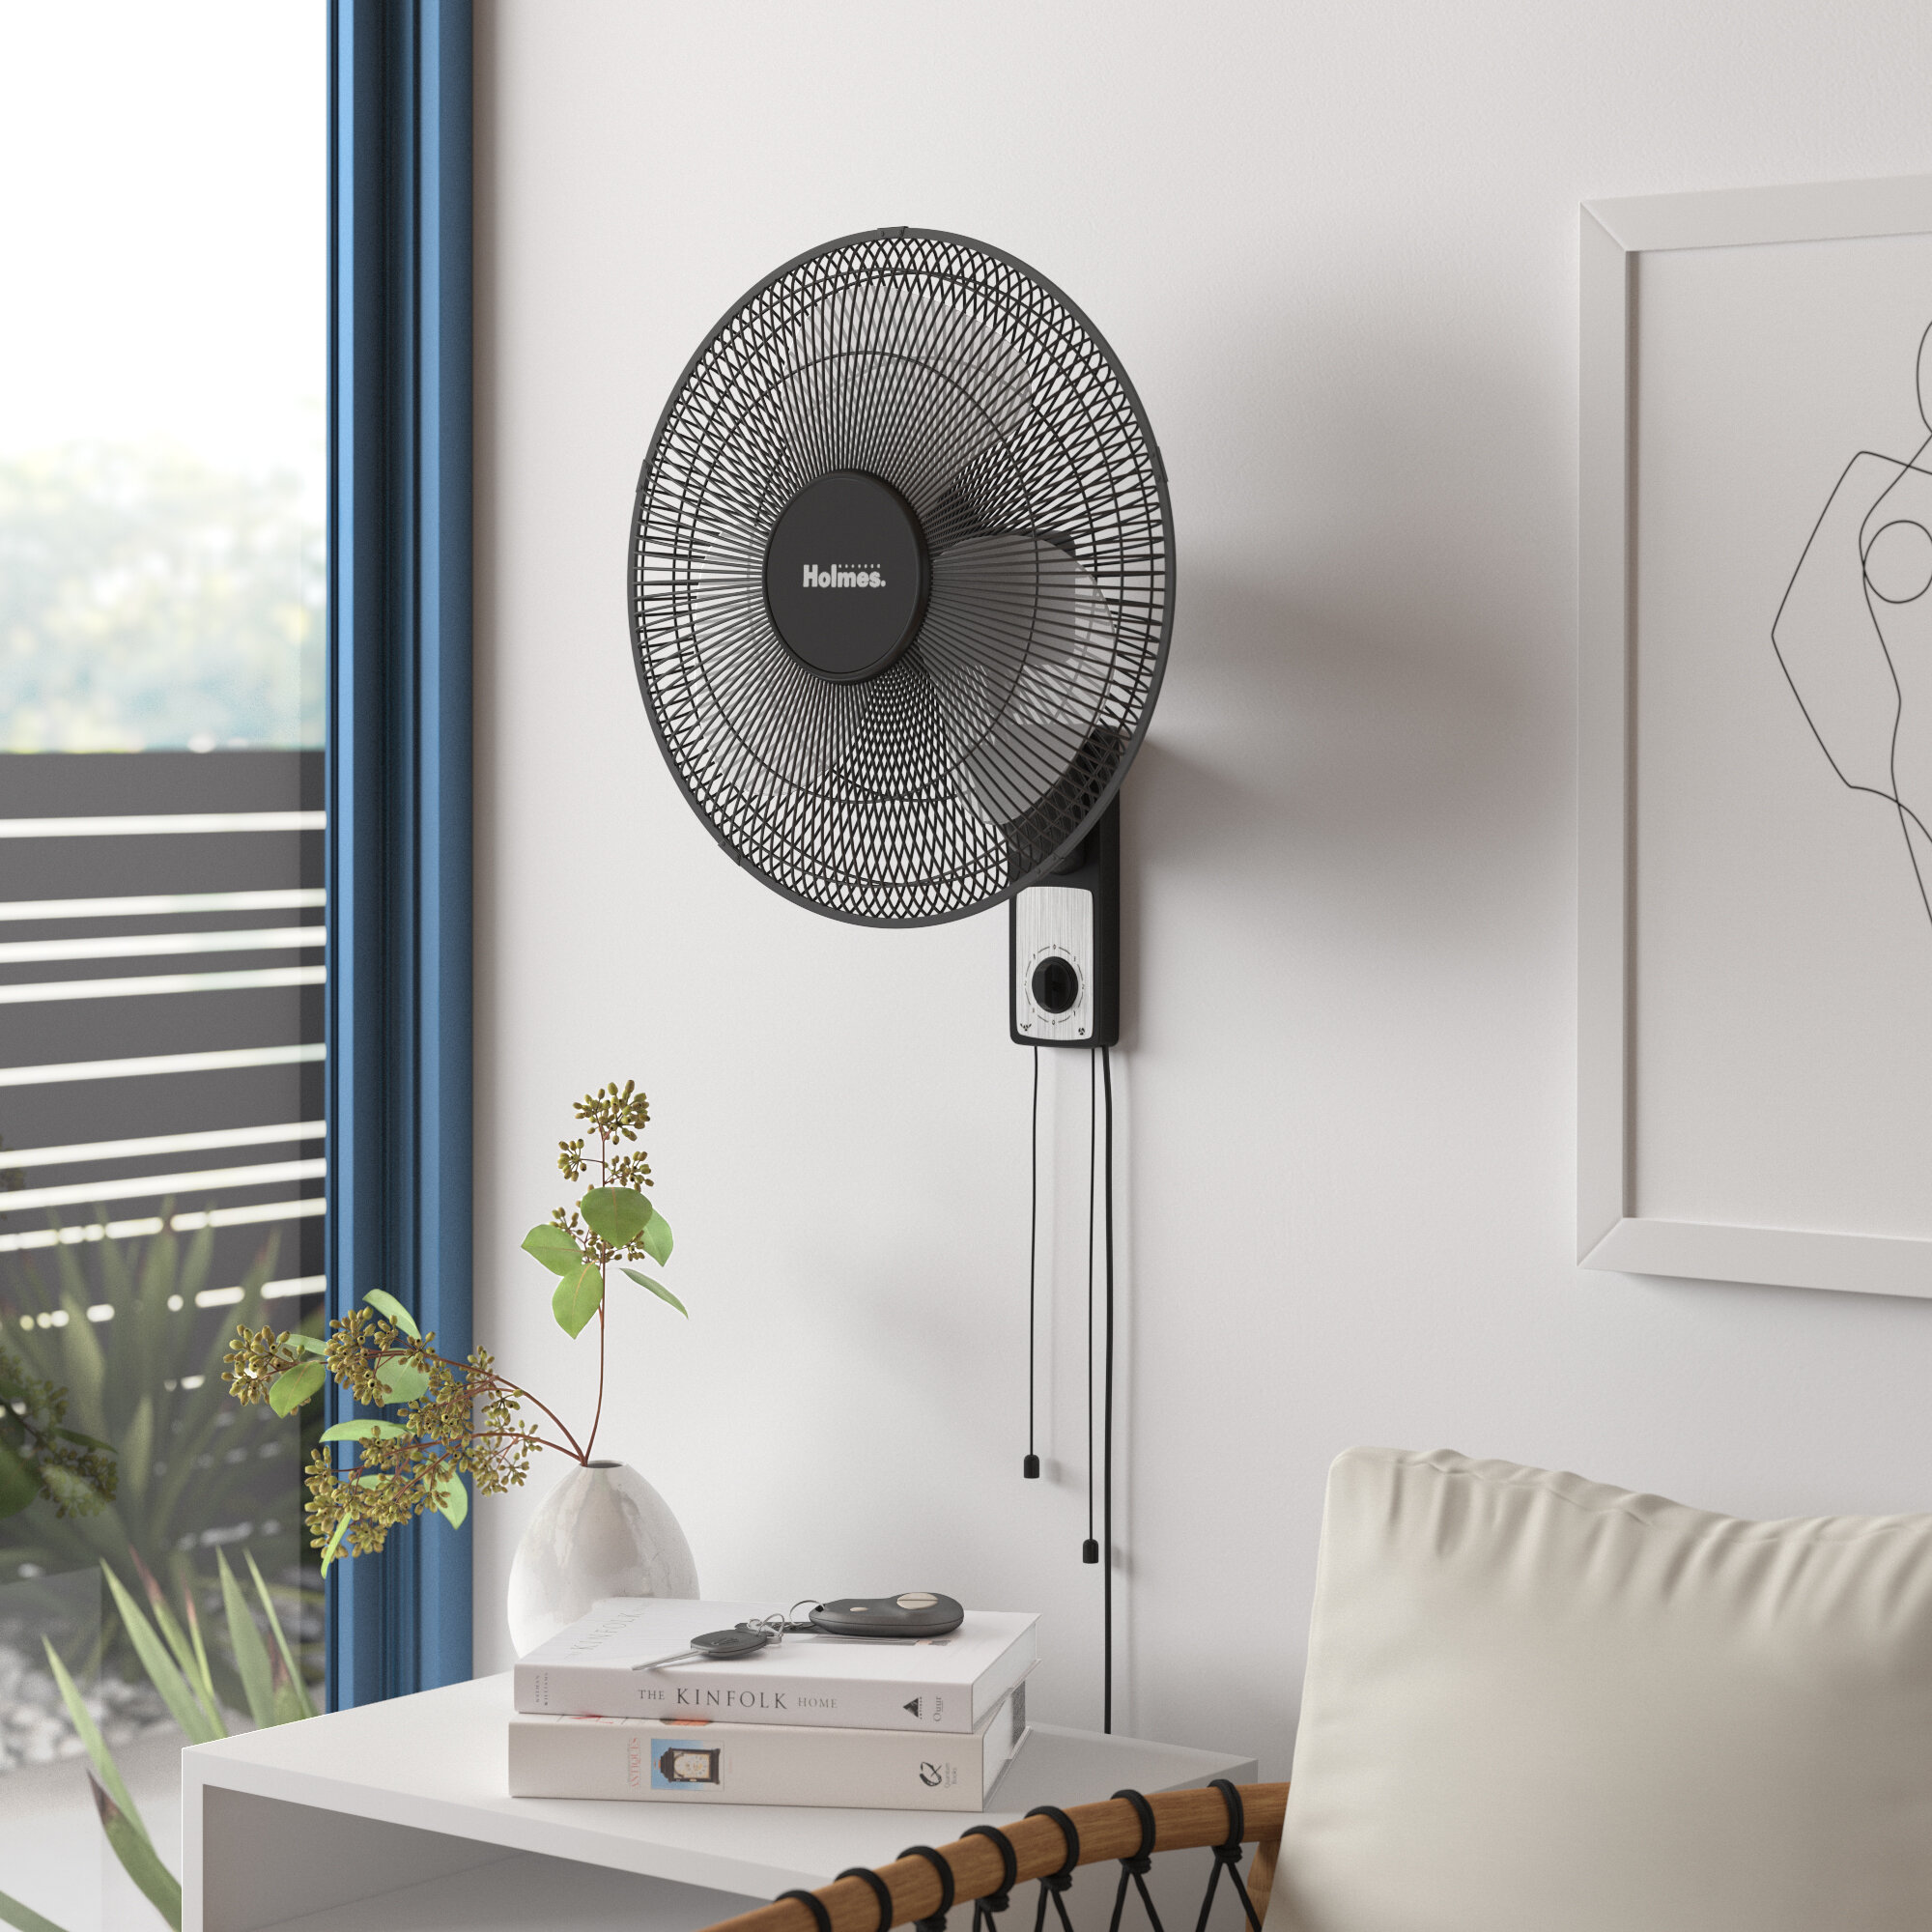 Holmes Products Holmes 16 Oscillating Wall Mounted Fan Reviews